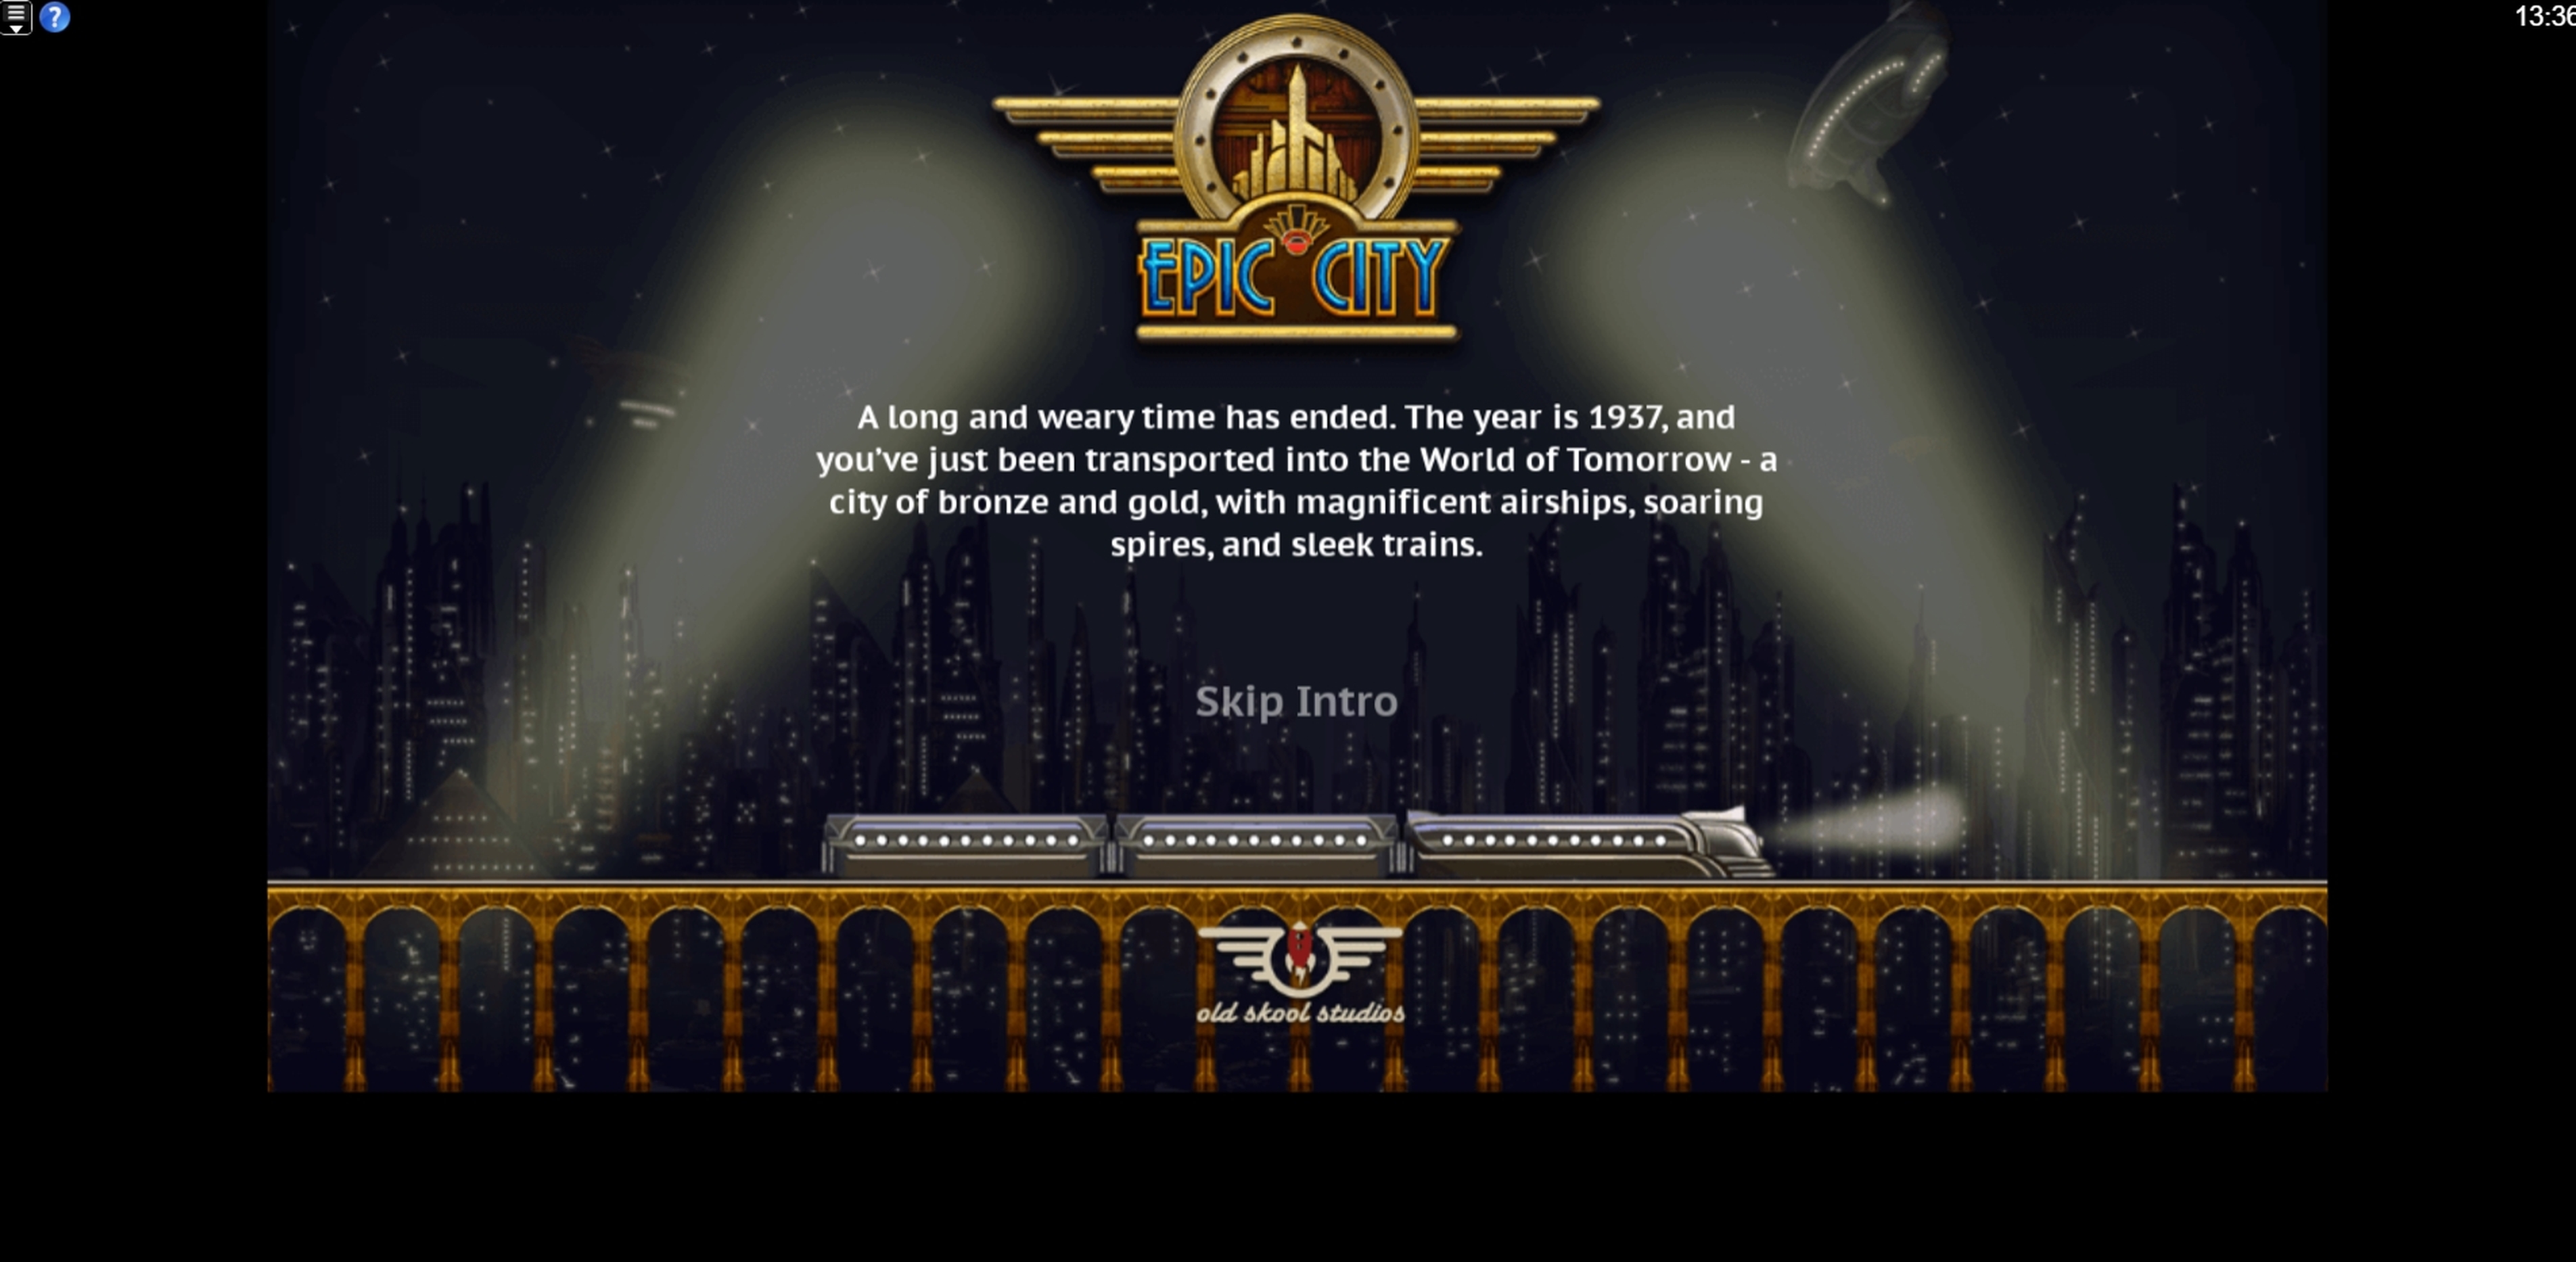 Play Epic City Free Casino Slot Game by Old Skool Studios